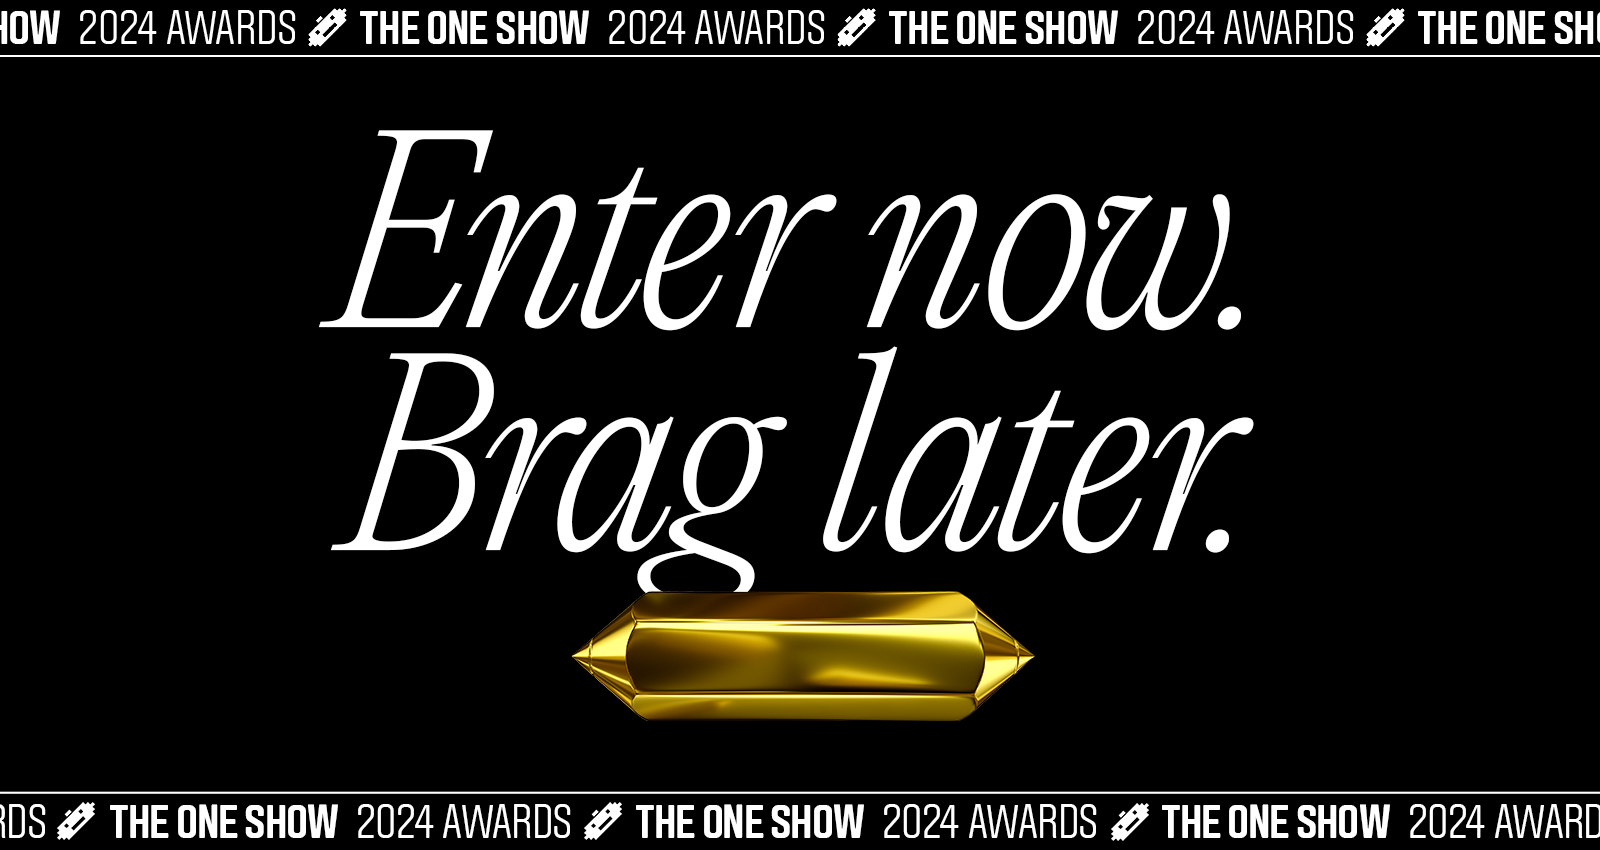 The One Show 2024 - Contest Watchers